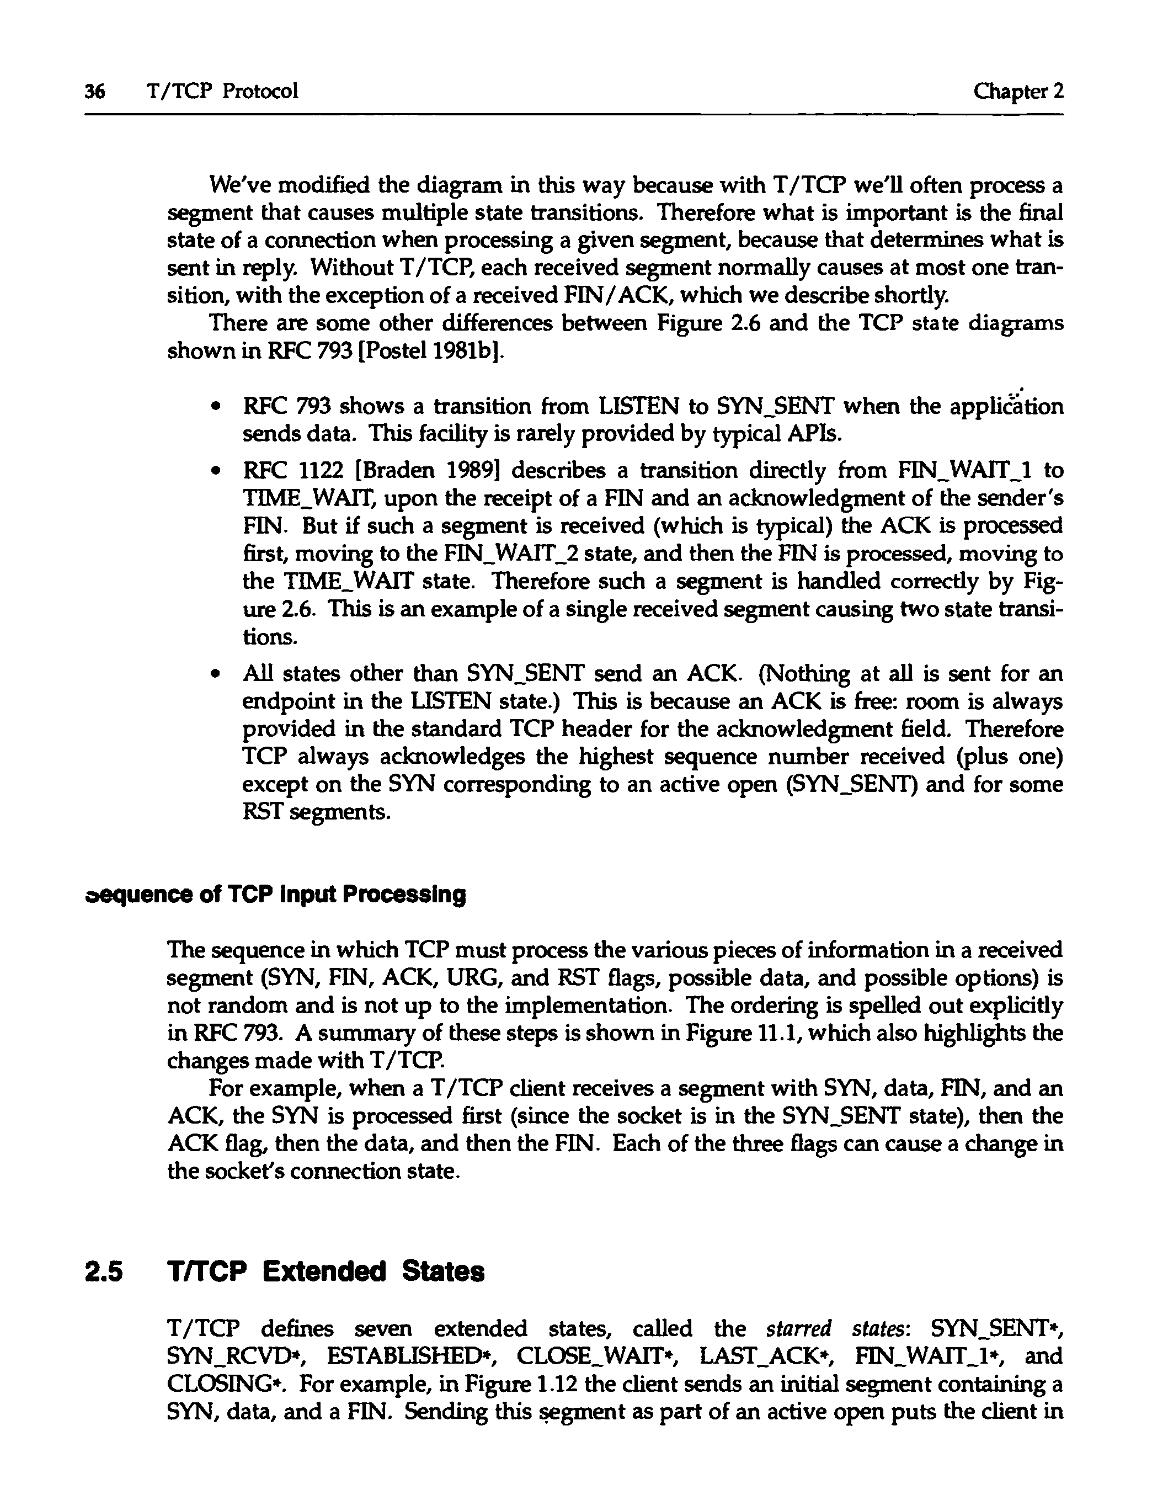 2.5 T/TCP Extended States